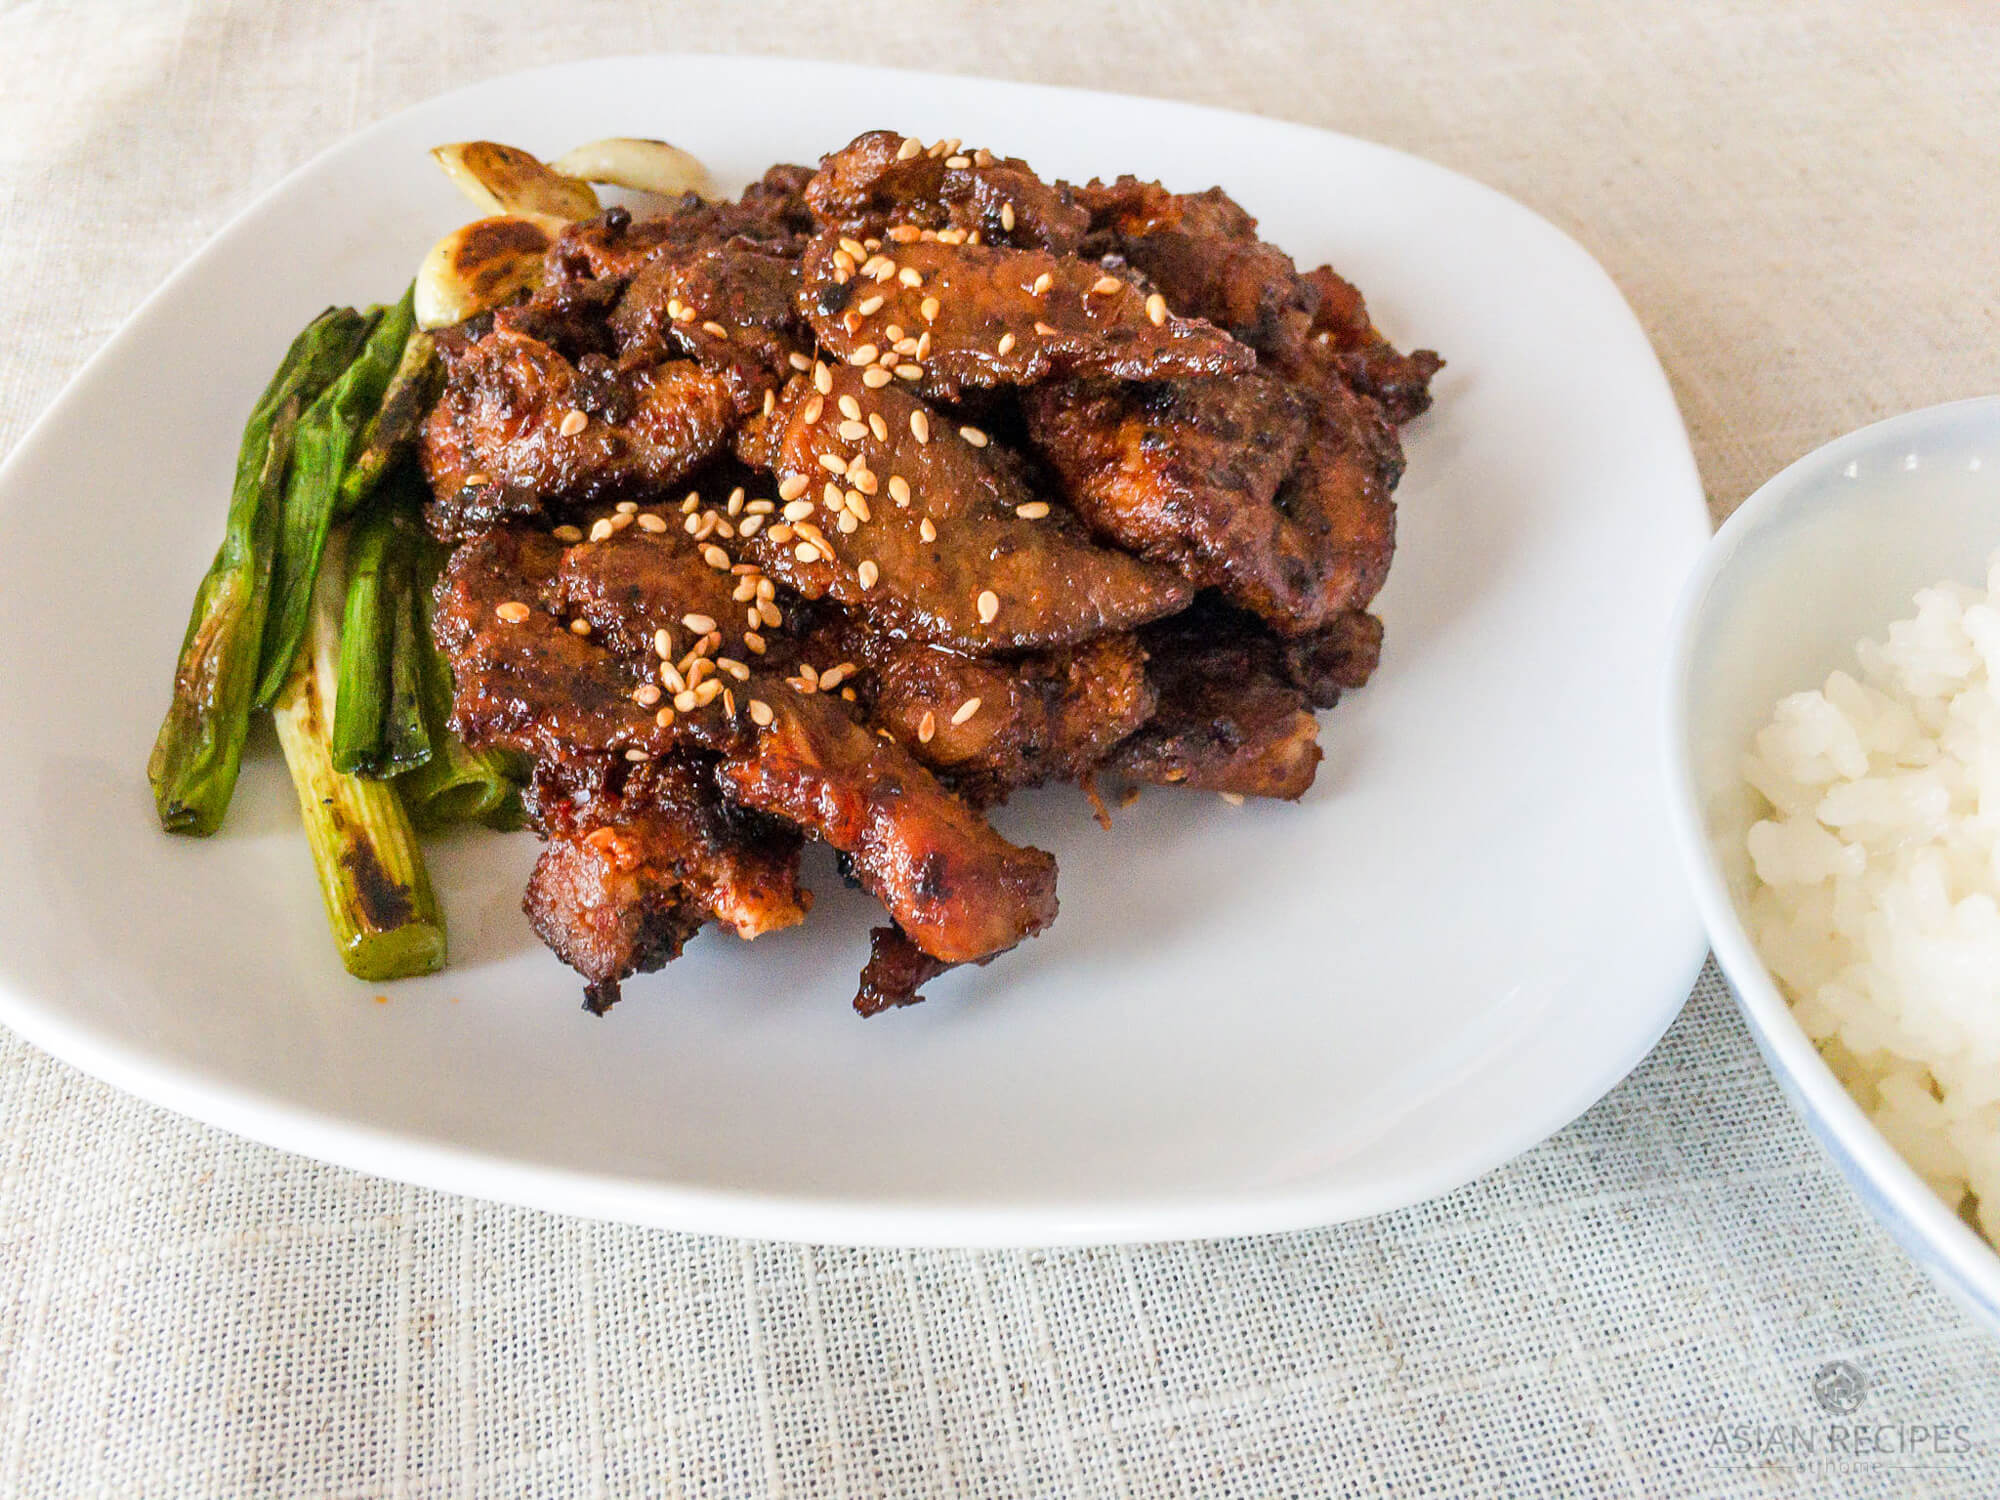 This spicy stir-fried pork belly recipe is so delicious and full of Korean flavors.